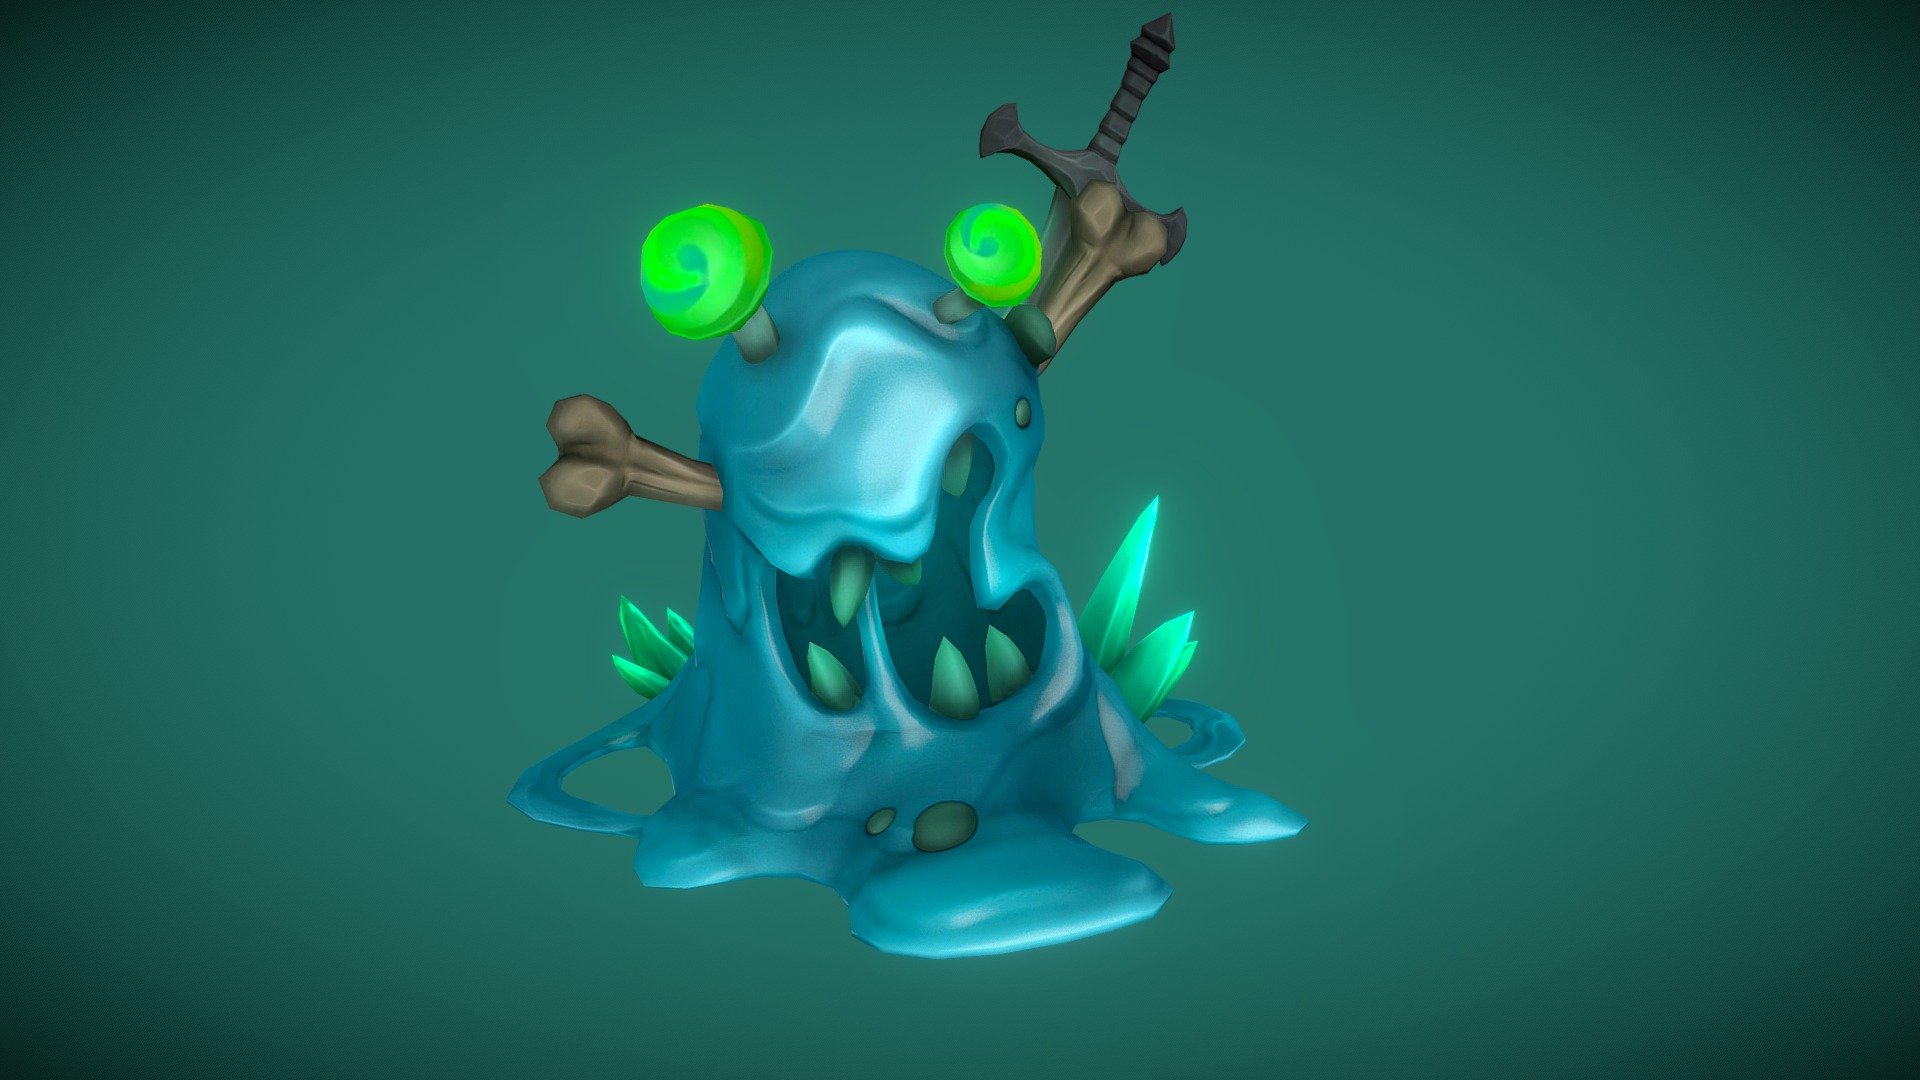 Stylized character for a project.

Software used: Zbrush, Autodesk Maya, Autodesk 3ds Max, Substance Painter - Stylized Fantasy Slug - 3D model by N-hance Studio (@Malice6731) 3d model